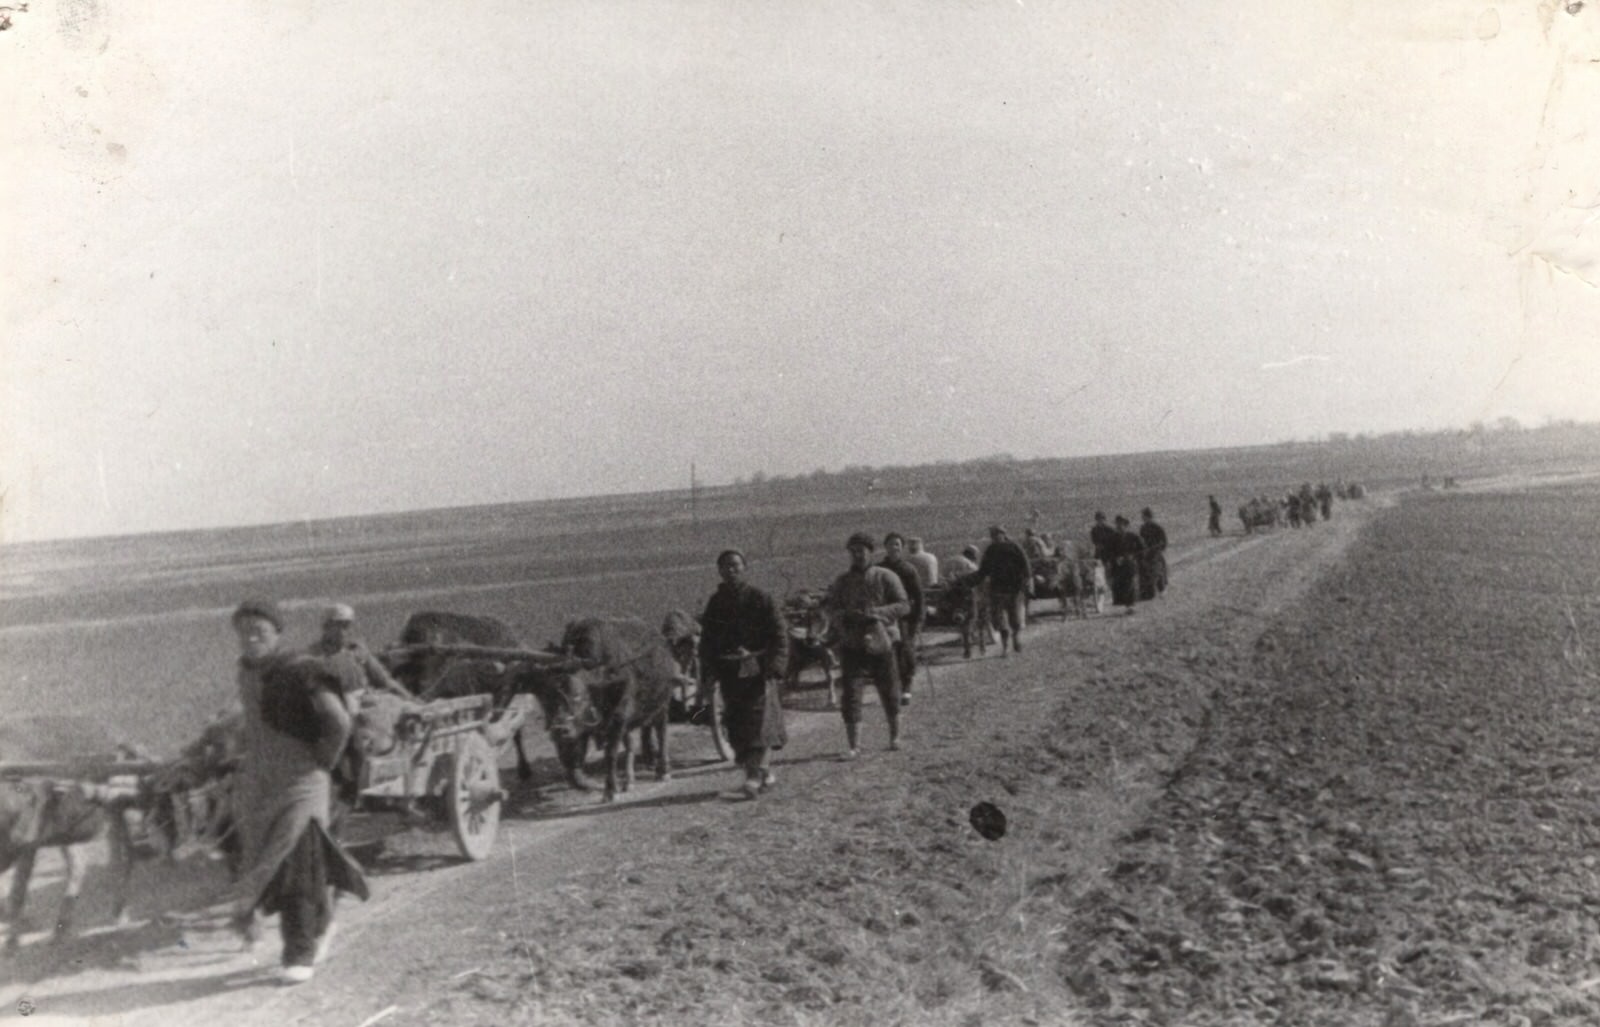 The wounded were often transported on lumbering, jolting ox-carts from the Central and North China fronts, to the Han River in the rear. 1937-1940